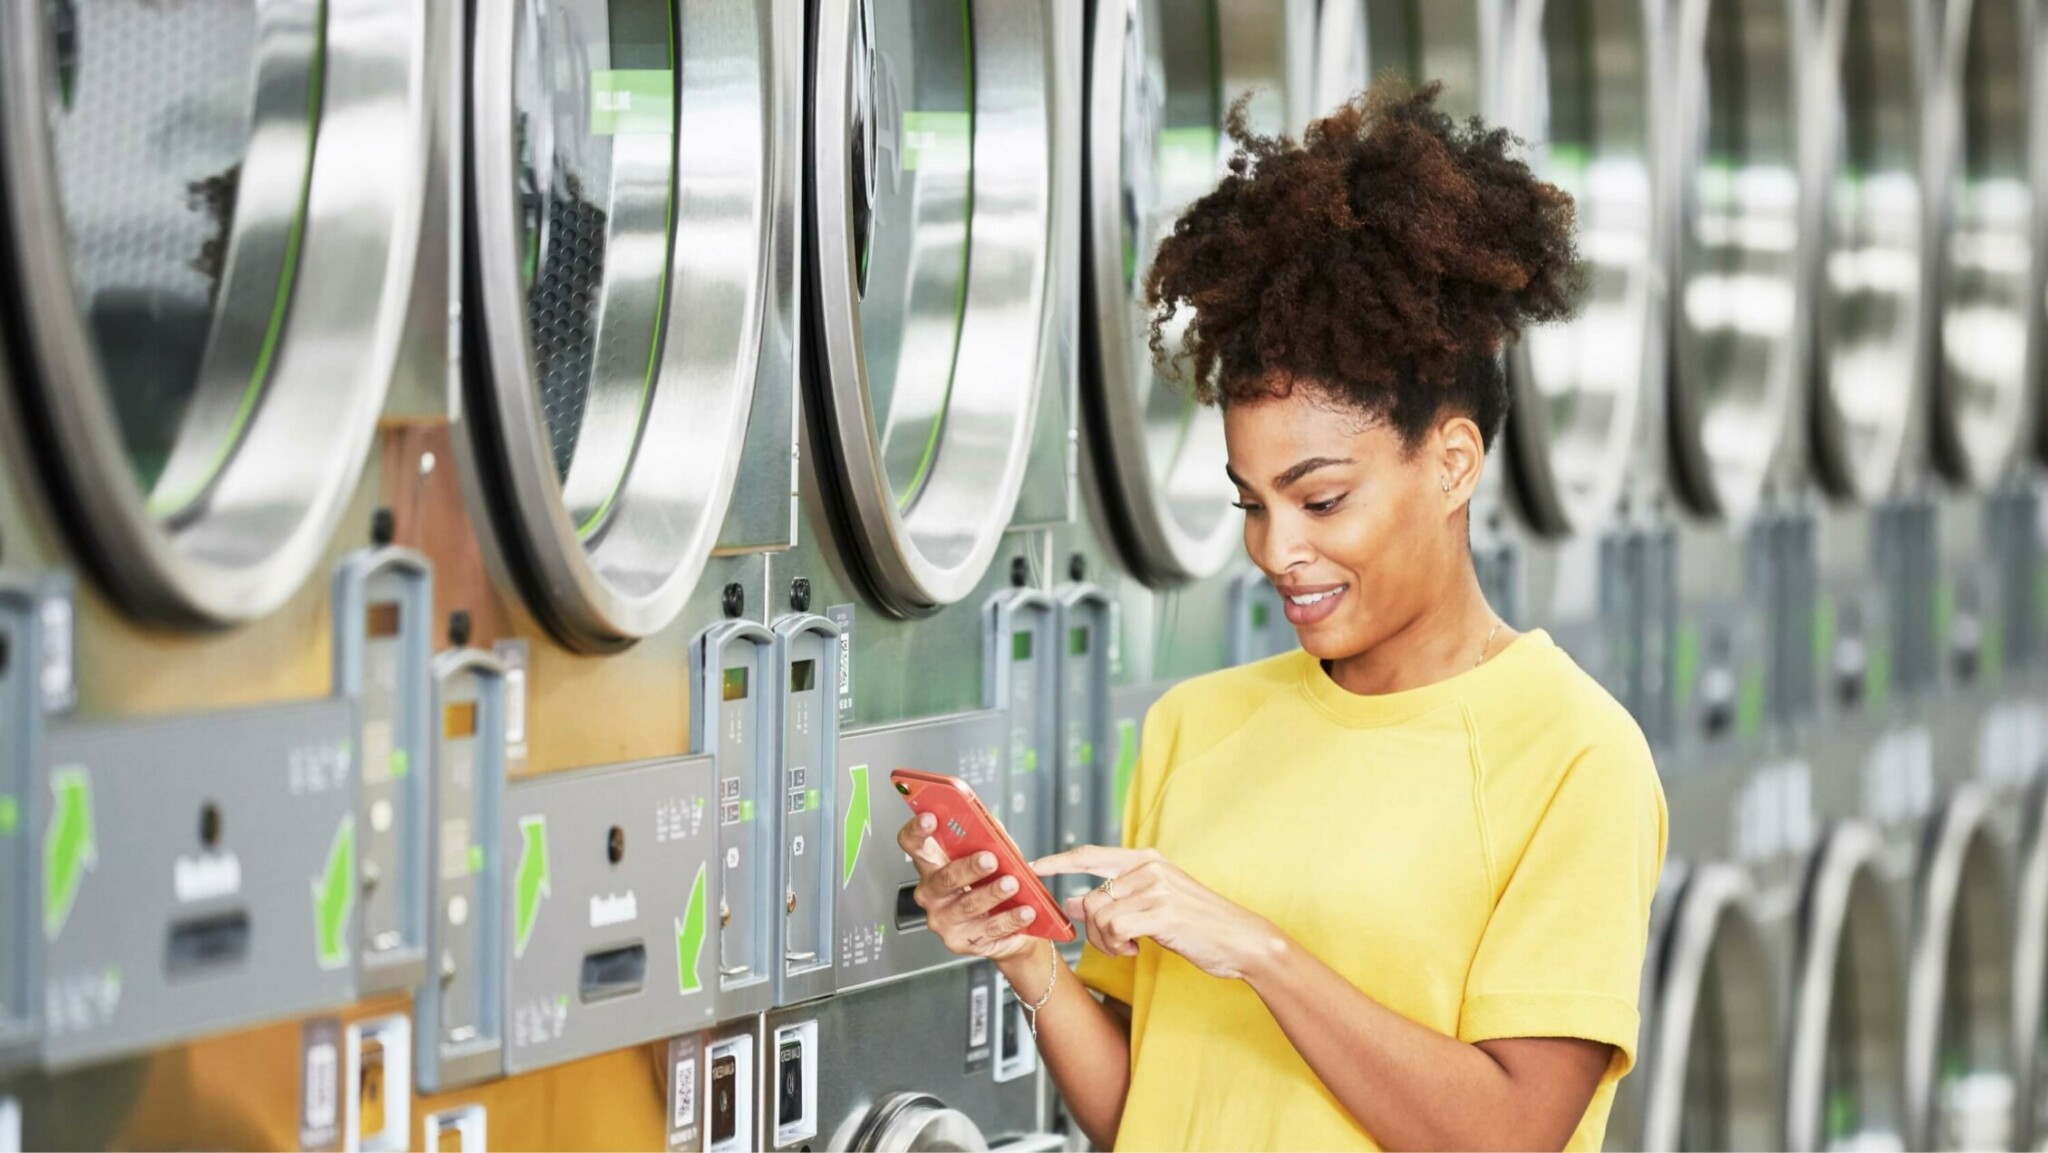 woman standing next to row of washing machines